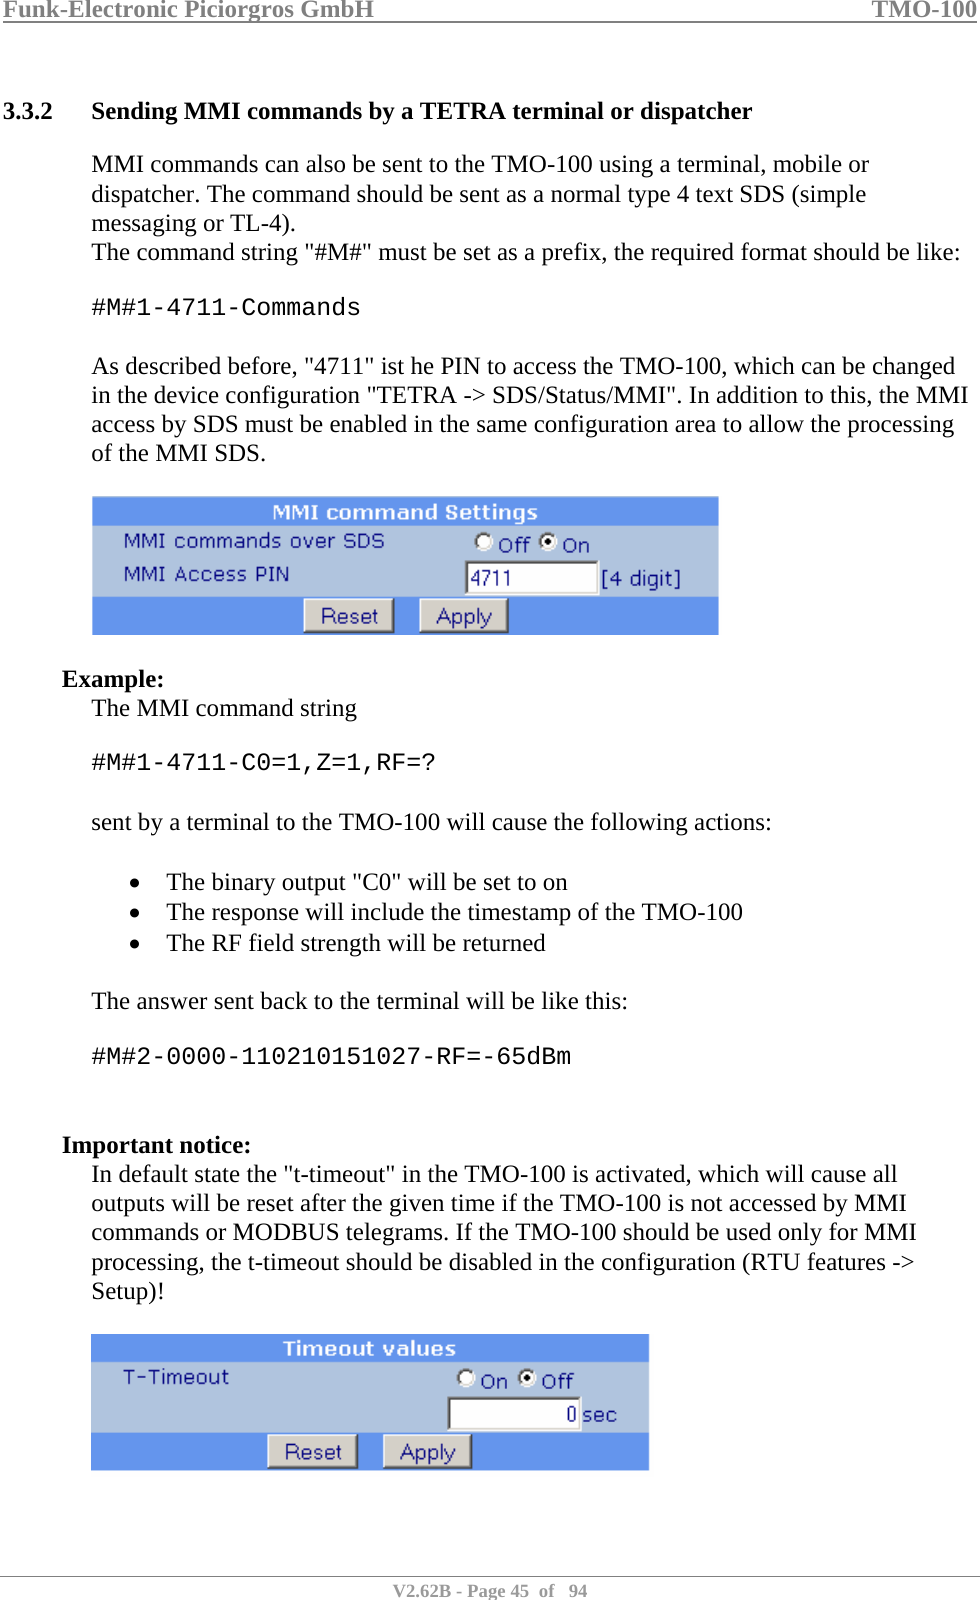 Funk-Electronic Piciorgros GmbH   TMO-100   V2.62B - Page 45  of   94   3.3.2 Sending MMI commands by a TETRA terminal or dispatcher MMI commands can also be sent to the TMO-100 using a terminal, mobile or dispatcher. The command should be sent as a normal type 4 text SDS (simple messaging or TL-4). The command string &quot;#M#&quot; must be set as a prefix, the required format should be like:  #M#1-4711-Commands  As described before, &quot;4711&quot; ist he PIN to access the TMO-100, which can be changed in the device configuration &quot;TETRA -&gt; SDS/Status/MMI&quot;. In addition to this, the MMI access by SDS must be enabled in the same configuration area to allow the processing of the MMI SDS.    Example: The MMI command string  #M#1-4711-C0=1,Z=1,RF=?  sent by a terminal to the TMO-100 will cause the following actions:   • The binary output &quot;C0&quot; will be set to on • The response will include the timestamp of the TMO-100 • The RF field strength will be returned  The answer sent back to the terminal will be like this:  #M#2-0000-110210151027-RF=-65dBm   Important notice: In default state the &quot;t-timeout&quot; in the TMO-100 is activated, which will cause all outputs will be reset after the given time if the TMO-100 is not accessed by MMI commands or MODBUS telegrams. If the TMO-100 should be used only for MMI processing, the t-timeout should be disabled in the configuration (RTU features -&gt; Setup)!   